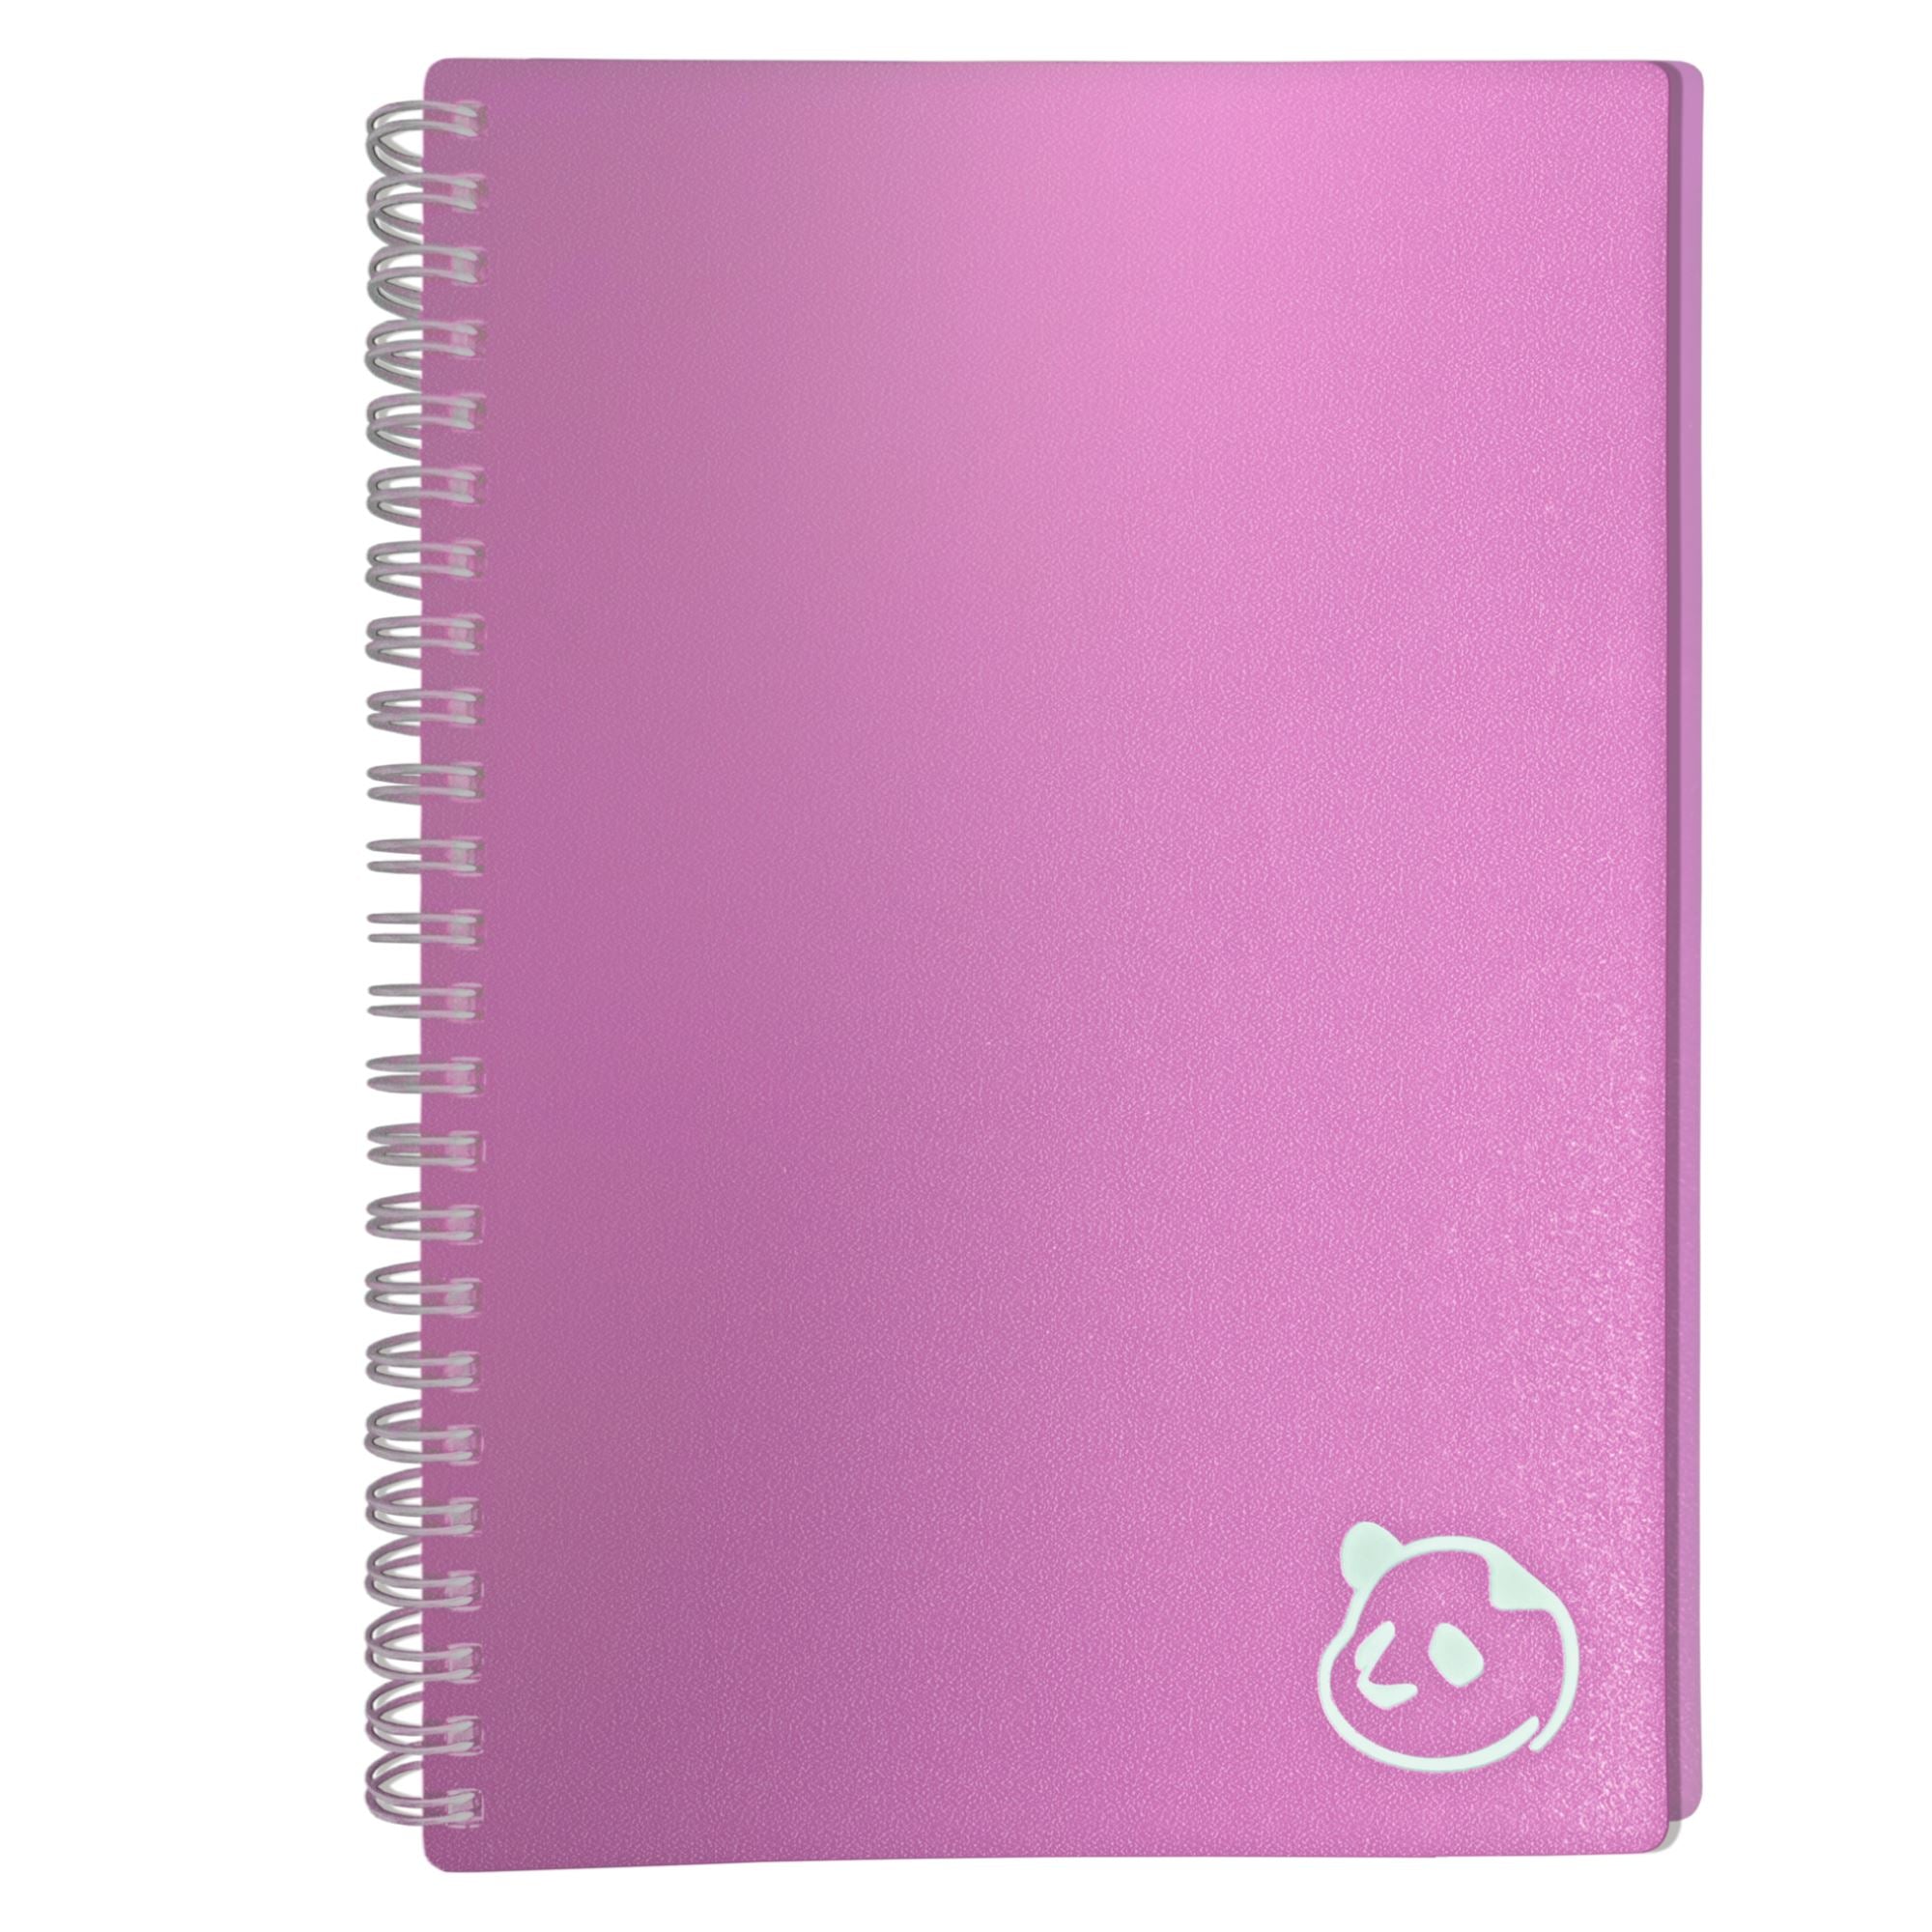 3 Month Student Edition – Removable Dividers & Pen Loop Sticker Allows for the Ultimate Customization Daily Planner 2.0 5.75" x 8.25" Undated Pink 